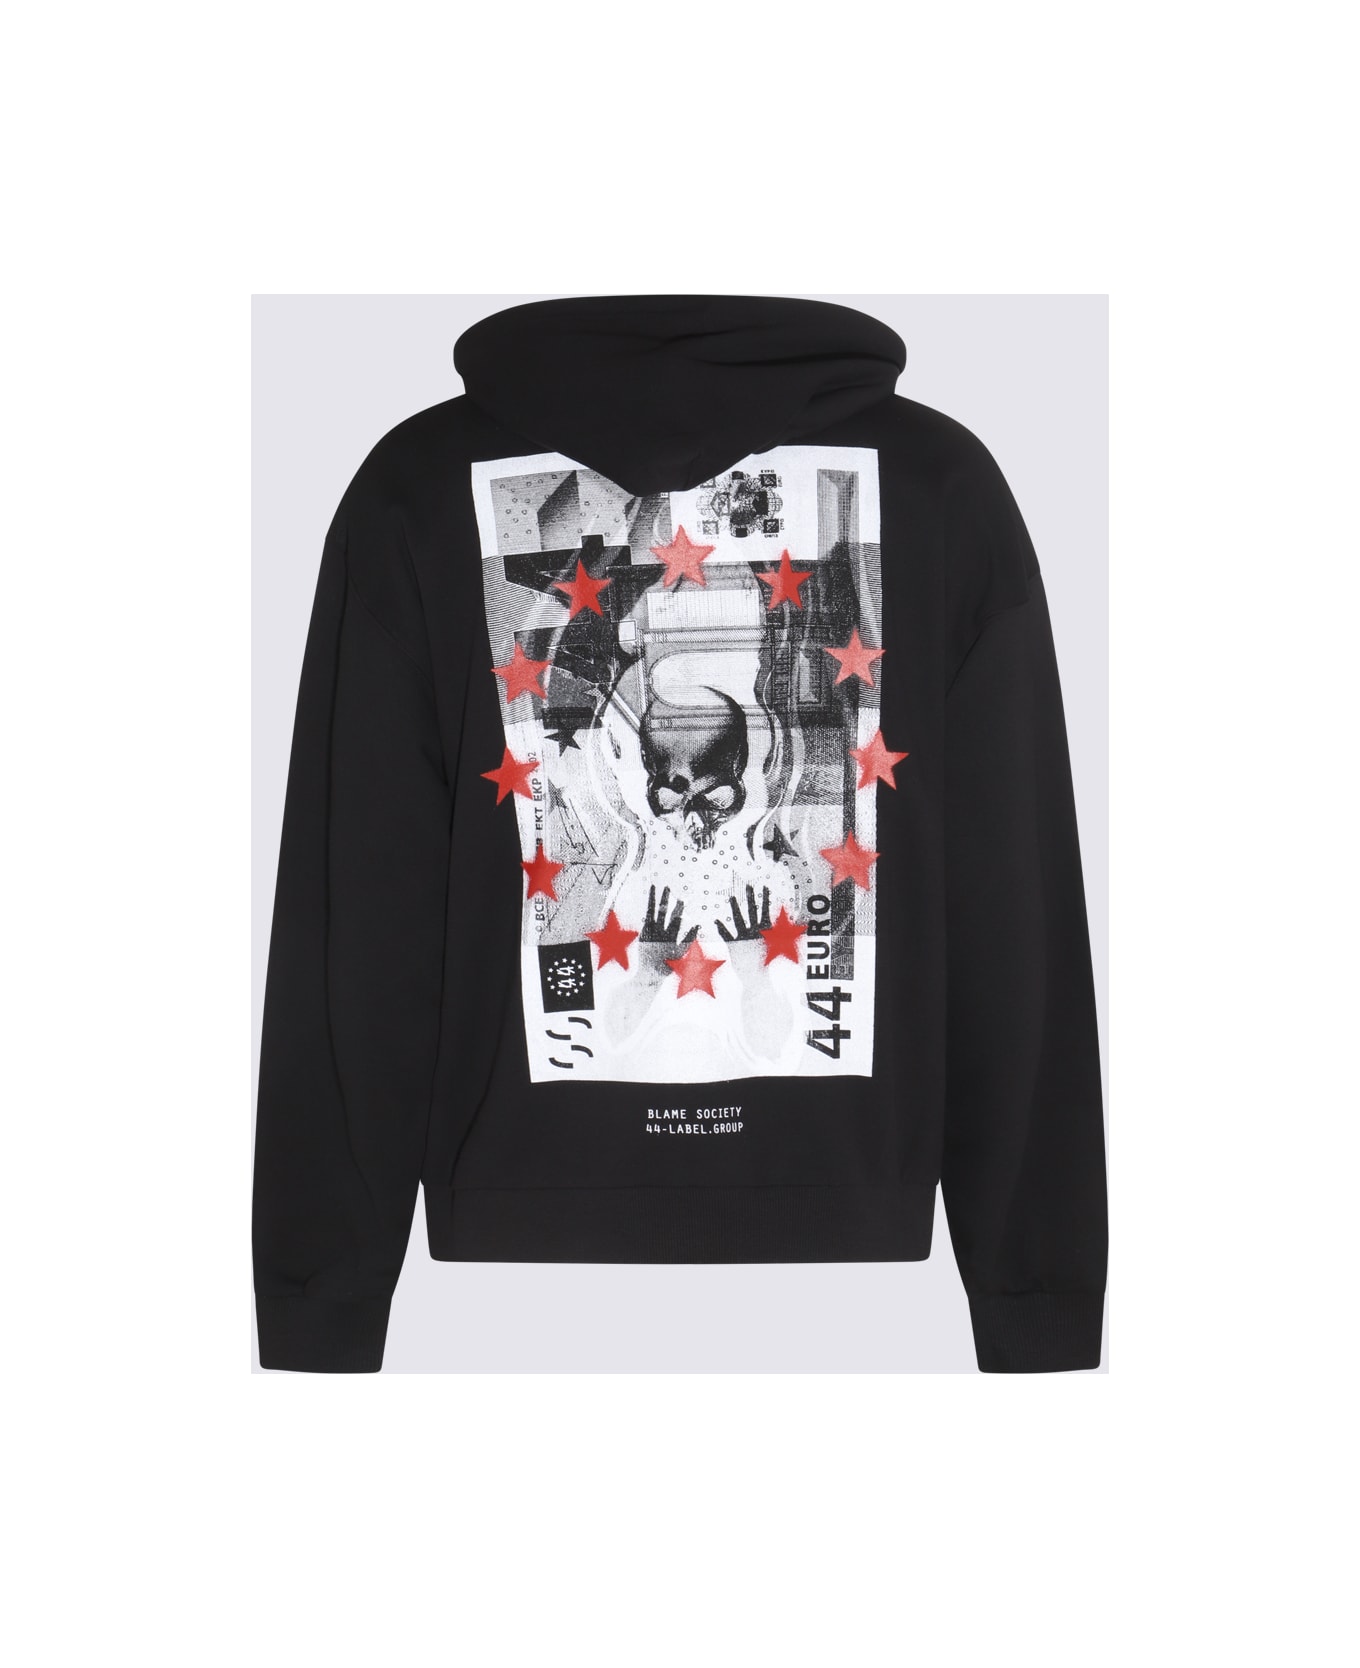 44 Label Group Black, White And Red Cotton Sweatshirt - Black